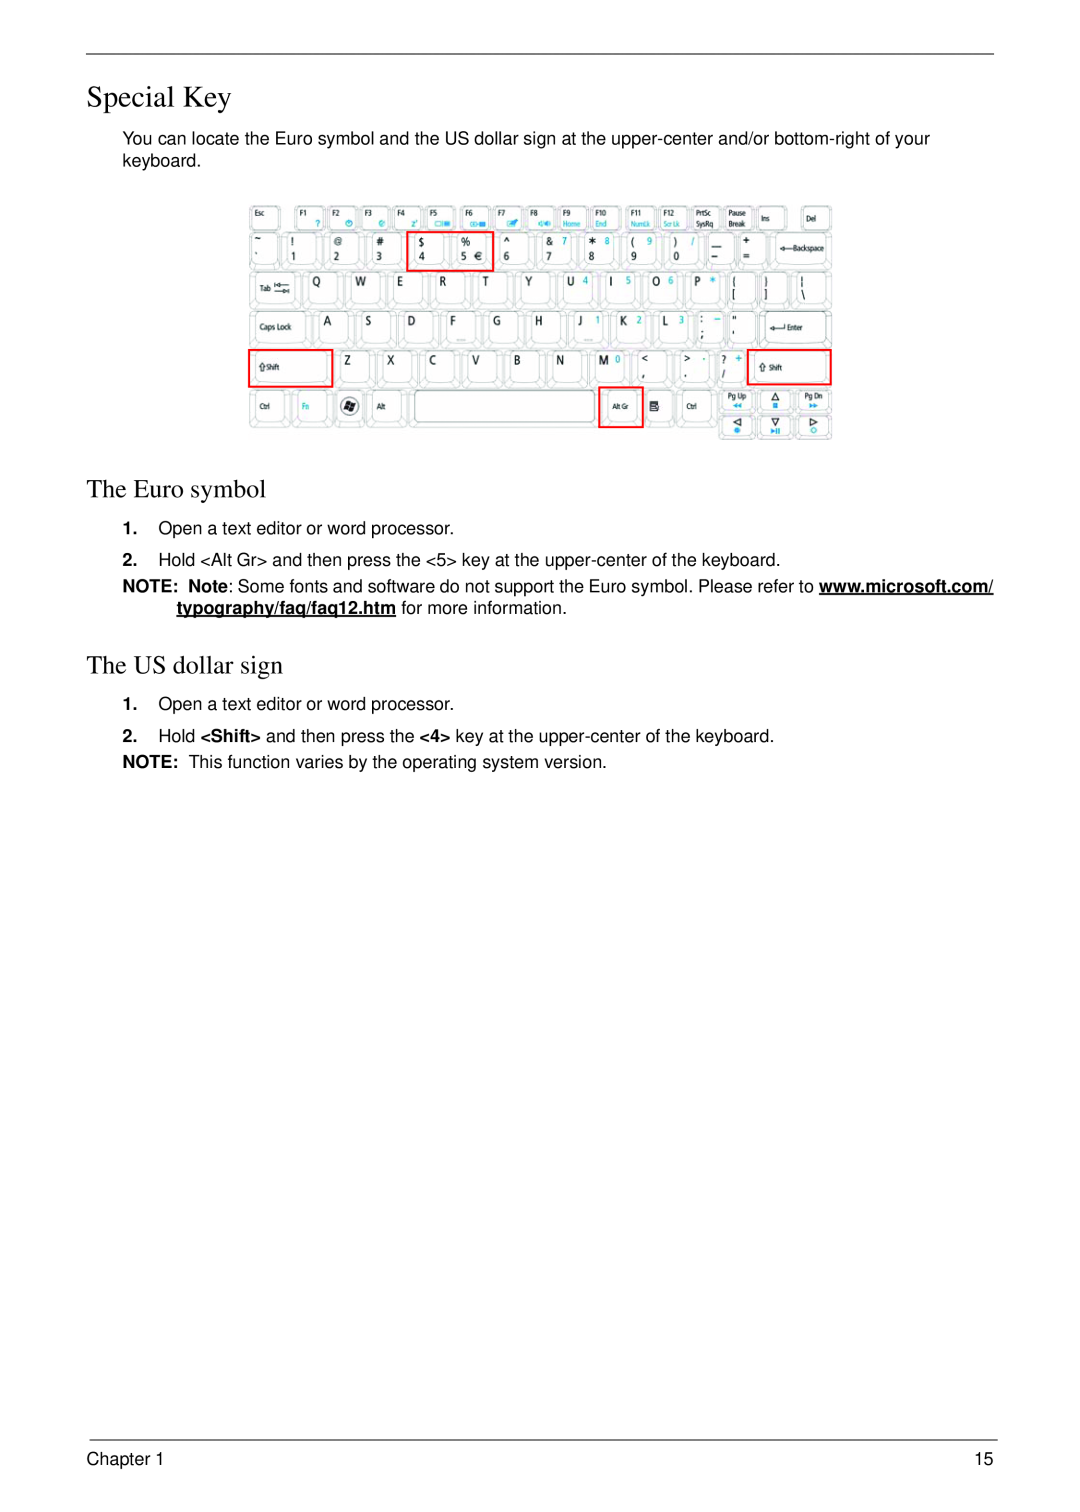 Acer 4730 manual Special Key, The Euro symbol, The US dollar sign 